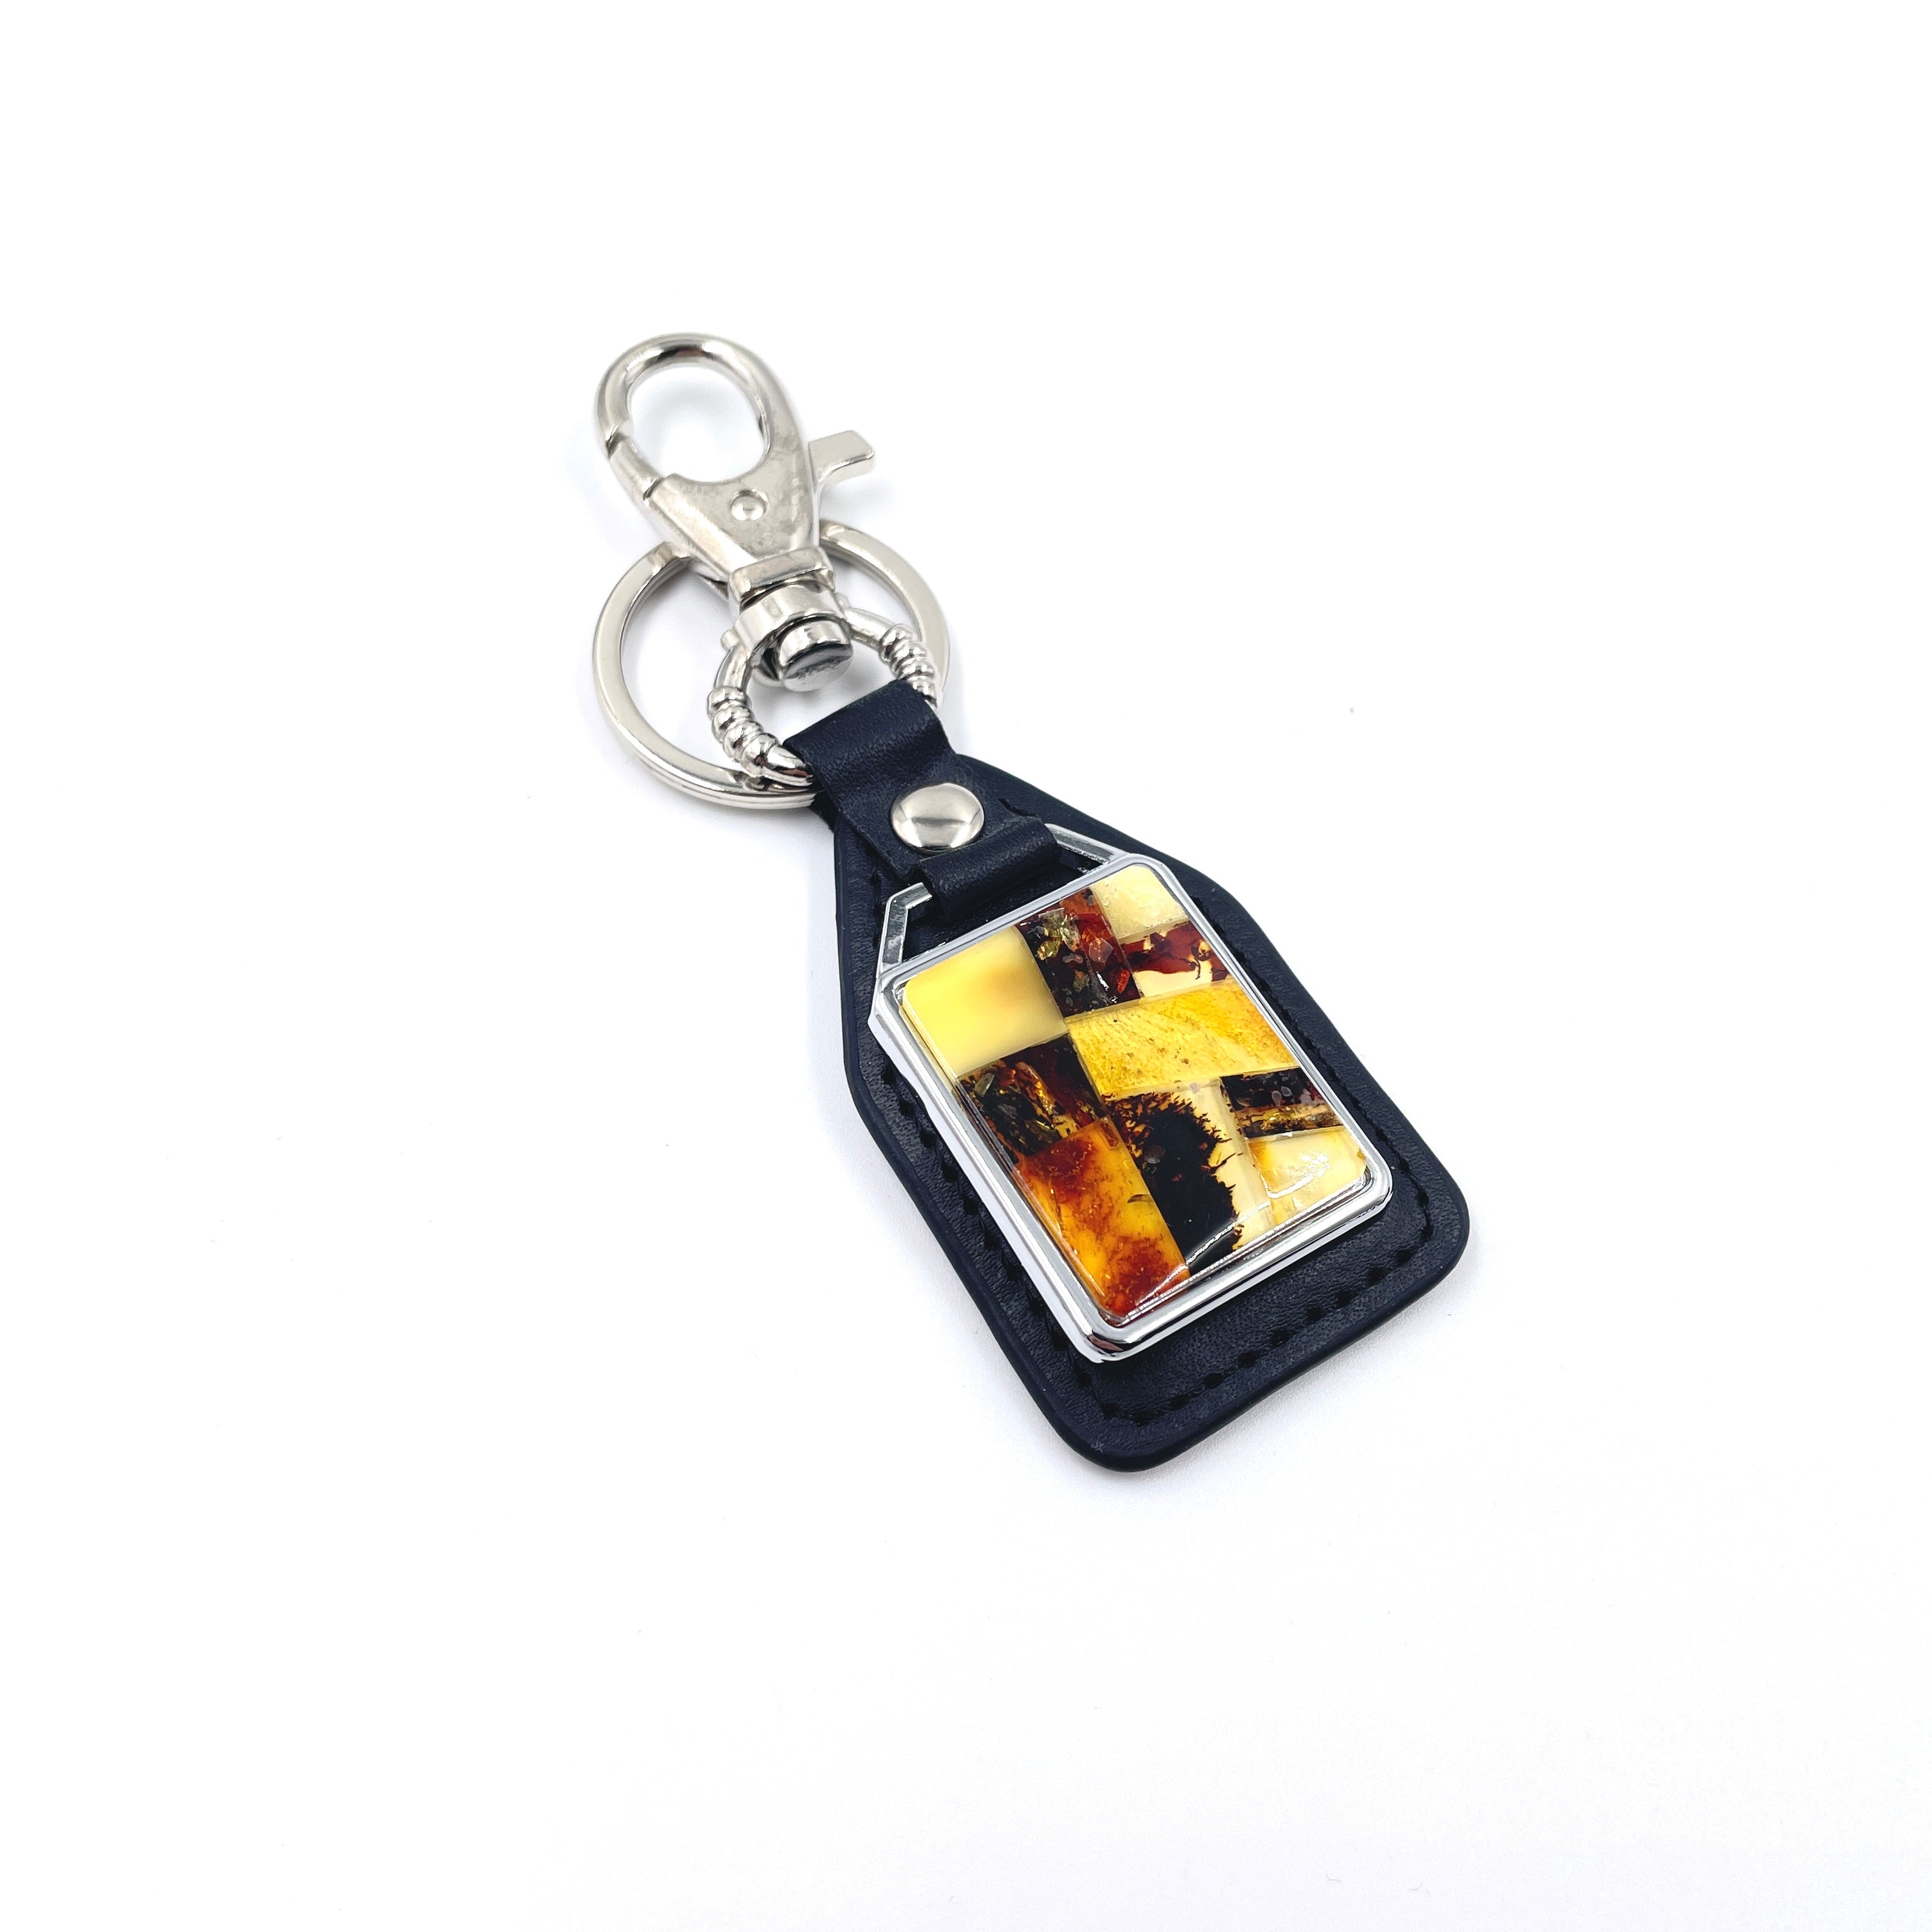 Keychain decorated with amber mosaic